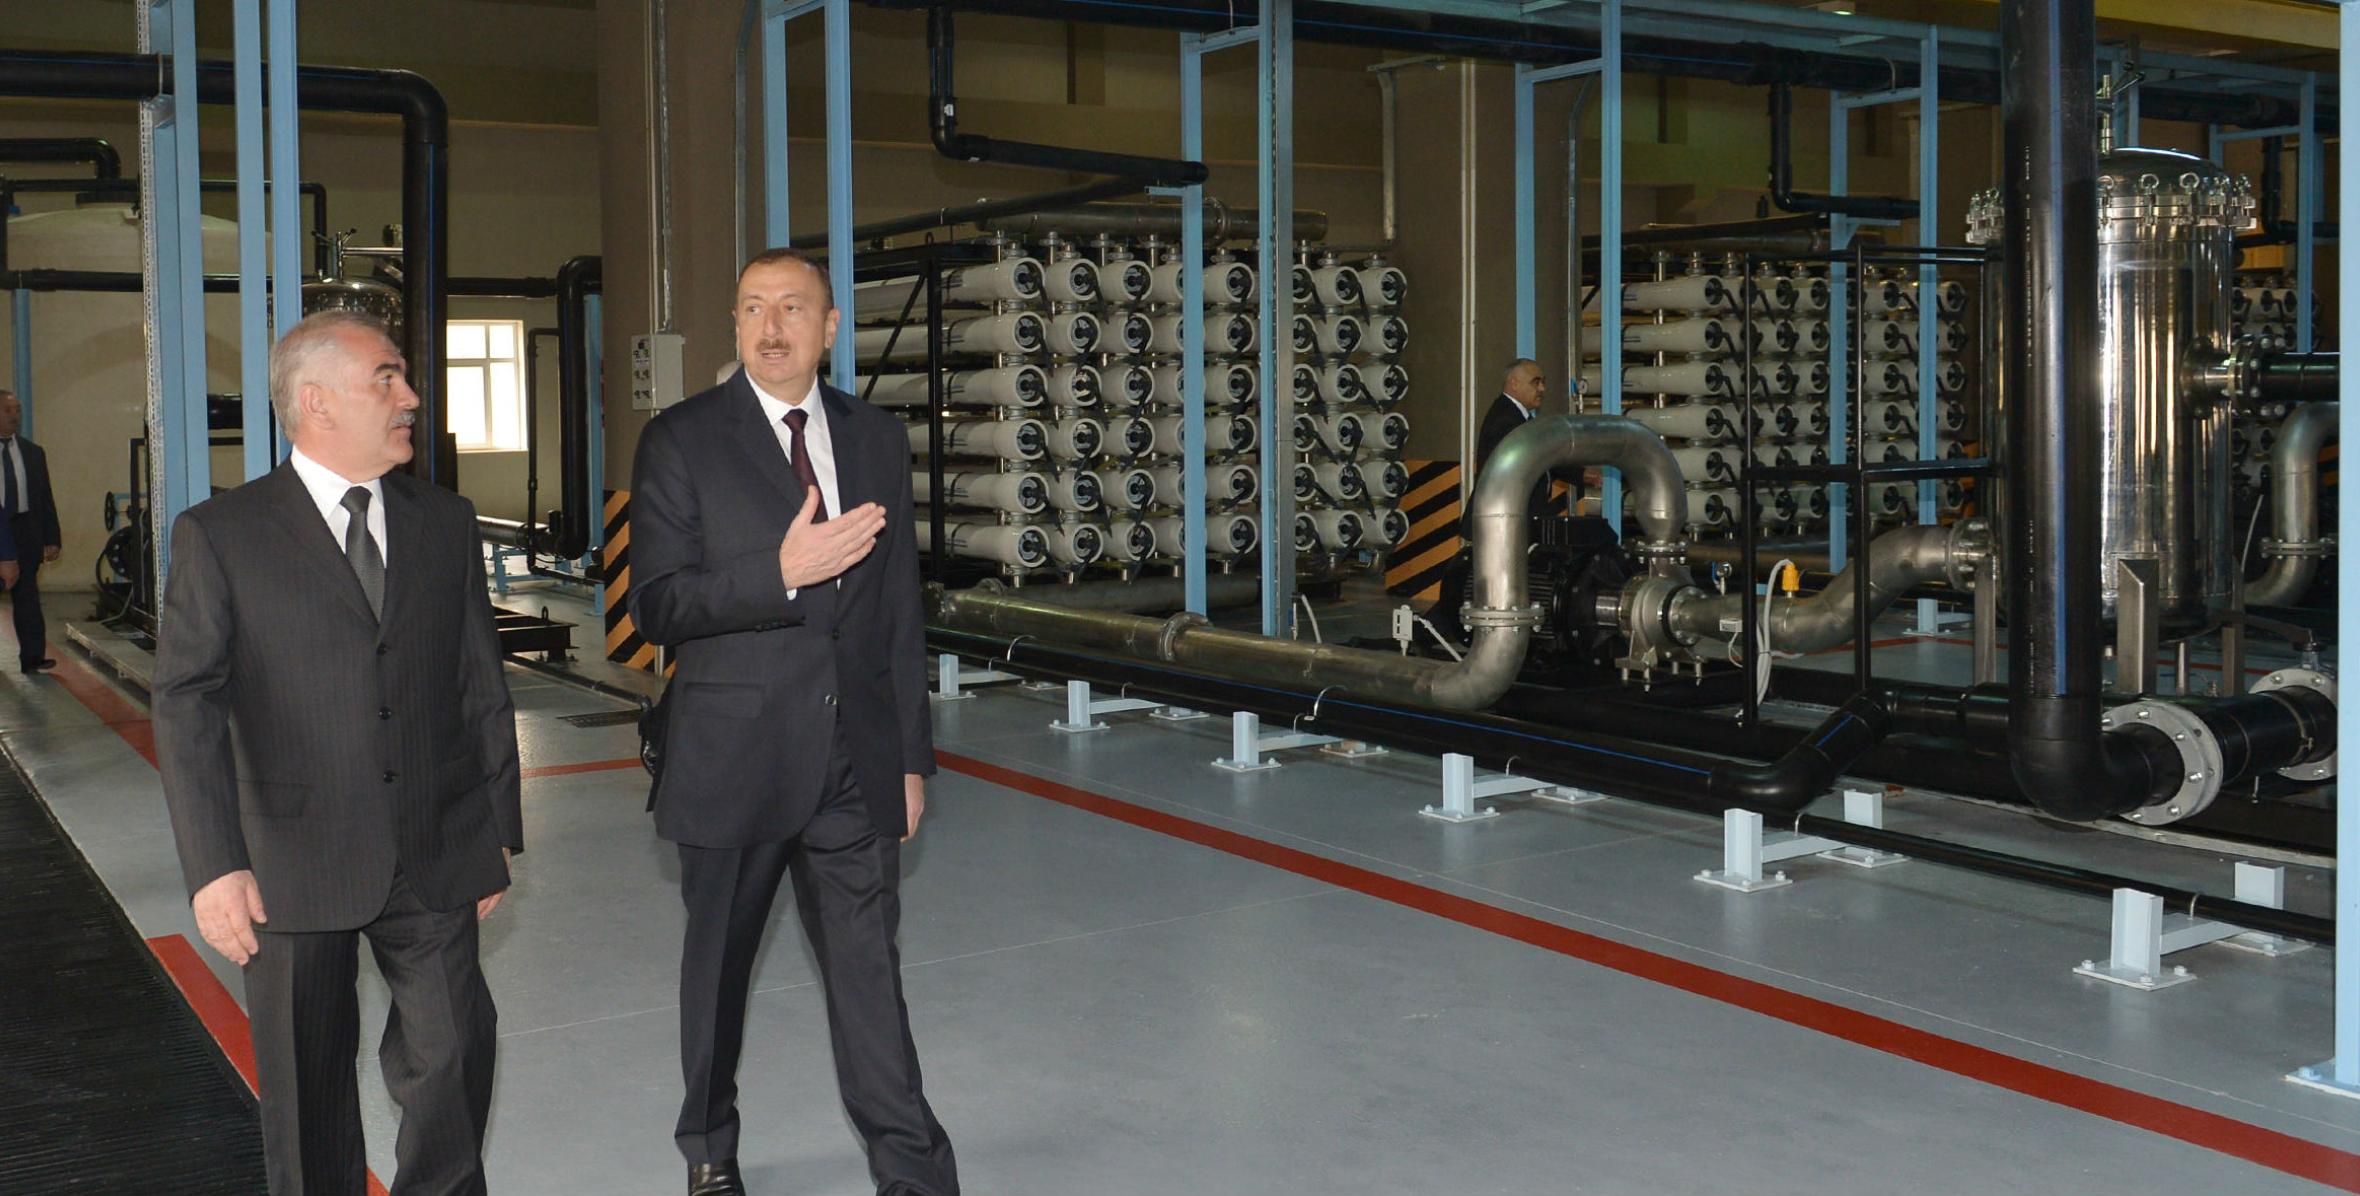 Ilham Aliyev attended ceremony to inaugurate Nakhchivan city reservoir and water purification plant complex